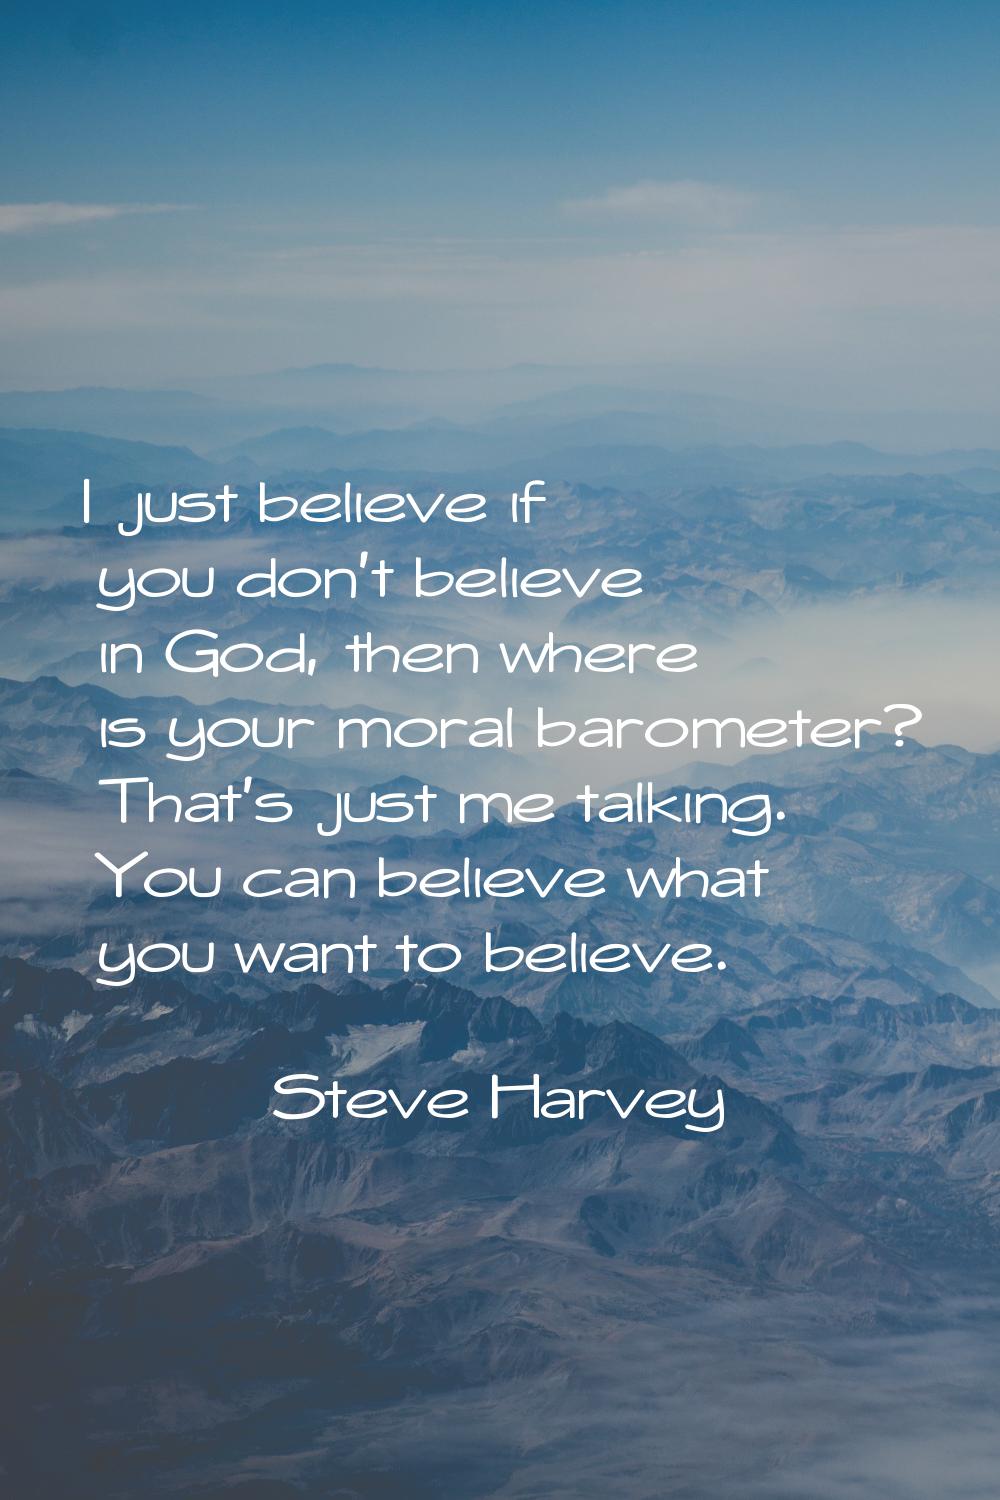 I just believe if you don't believe in God, then where is your moral barometer? That's just me talk